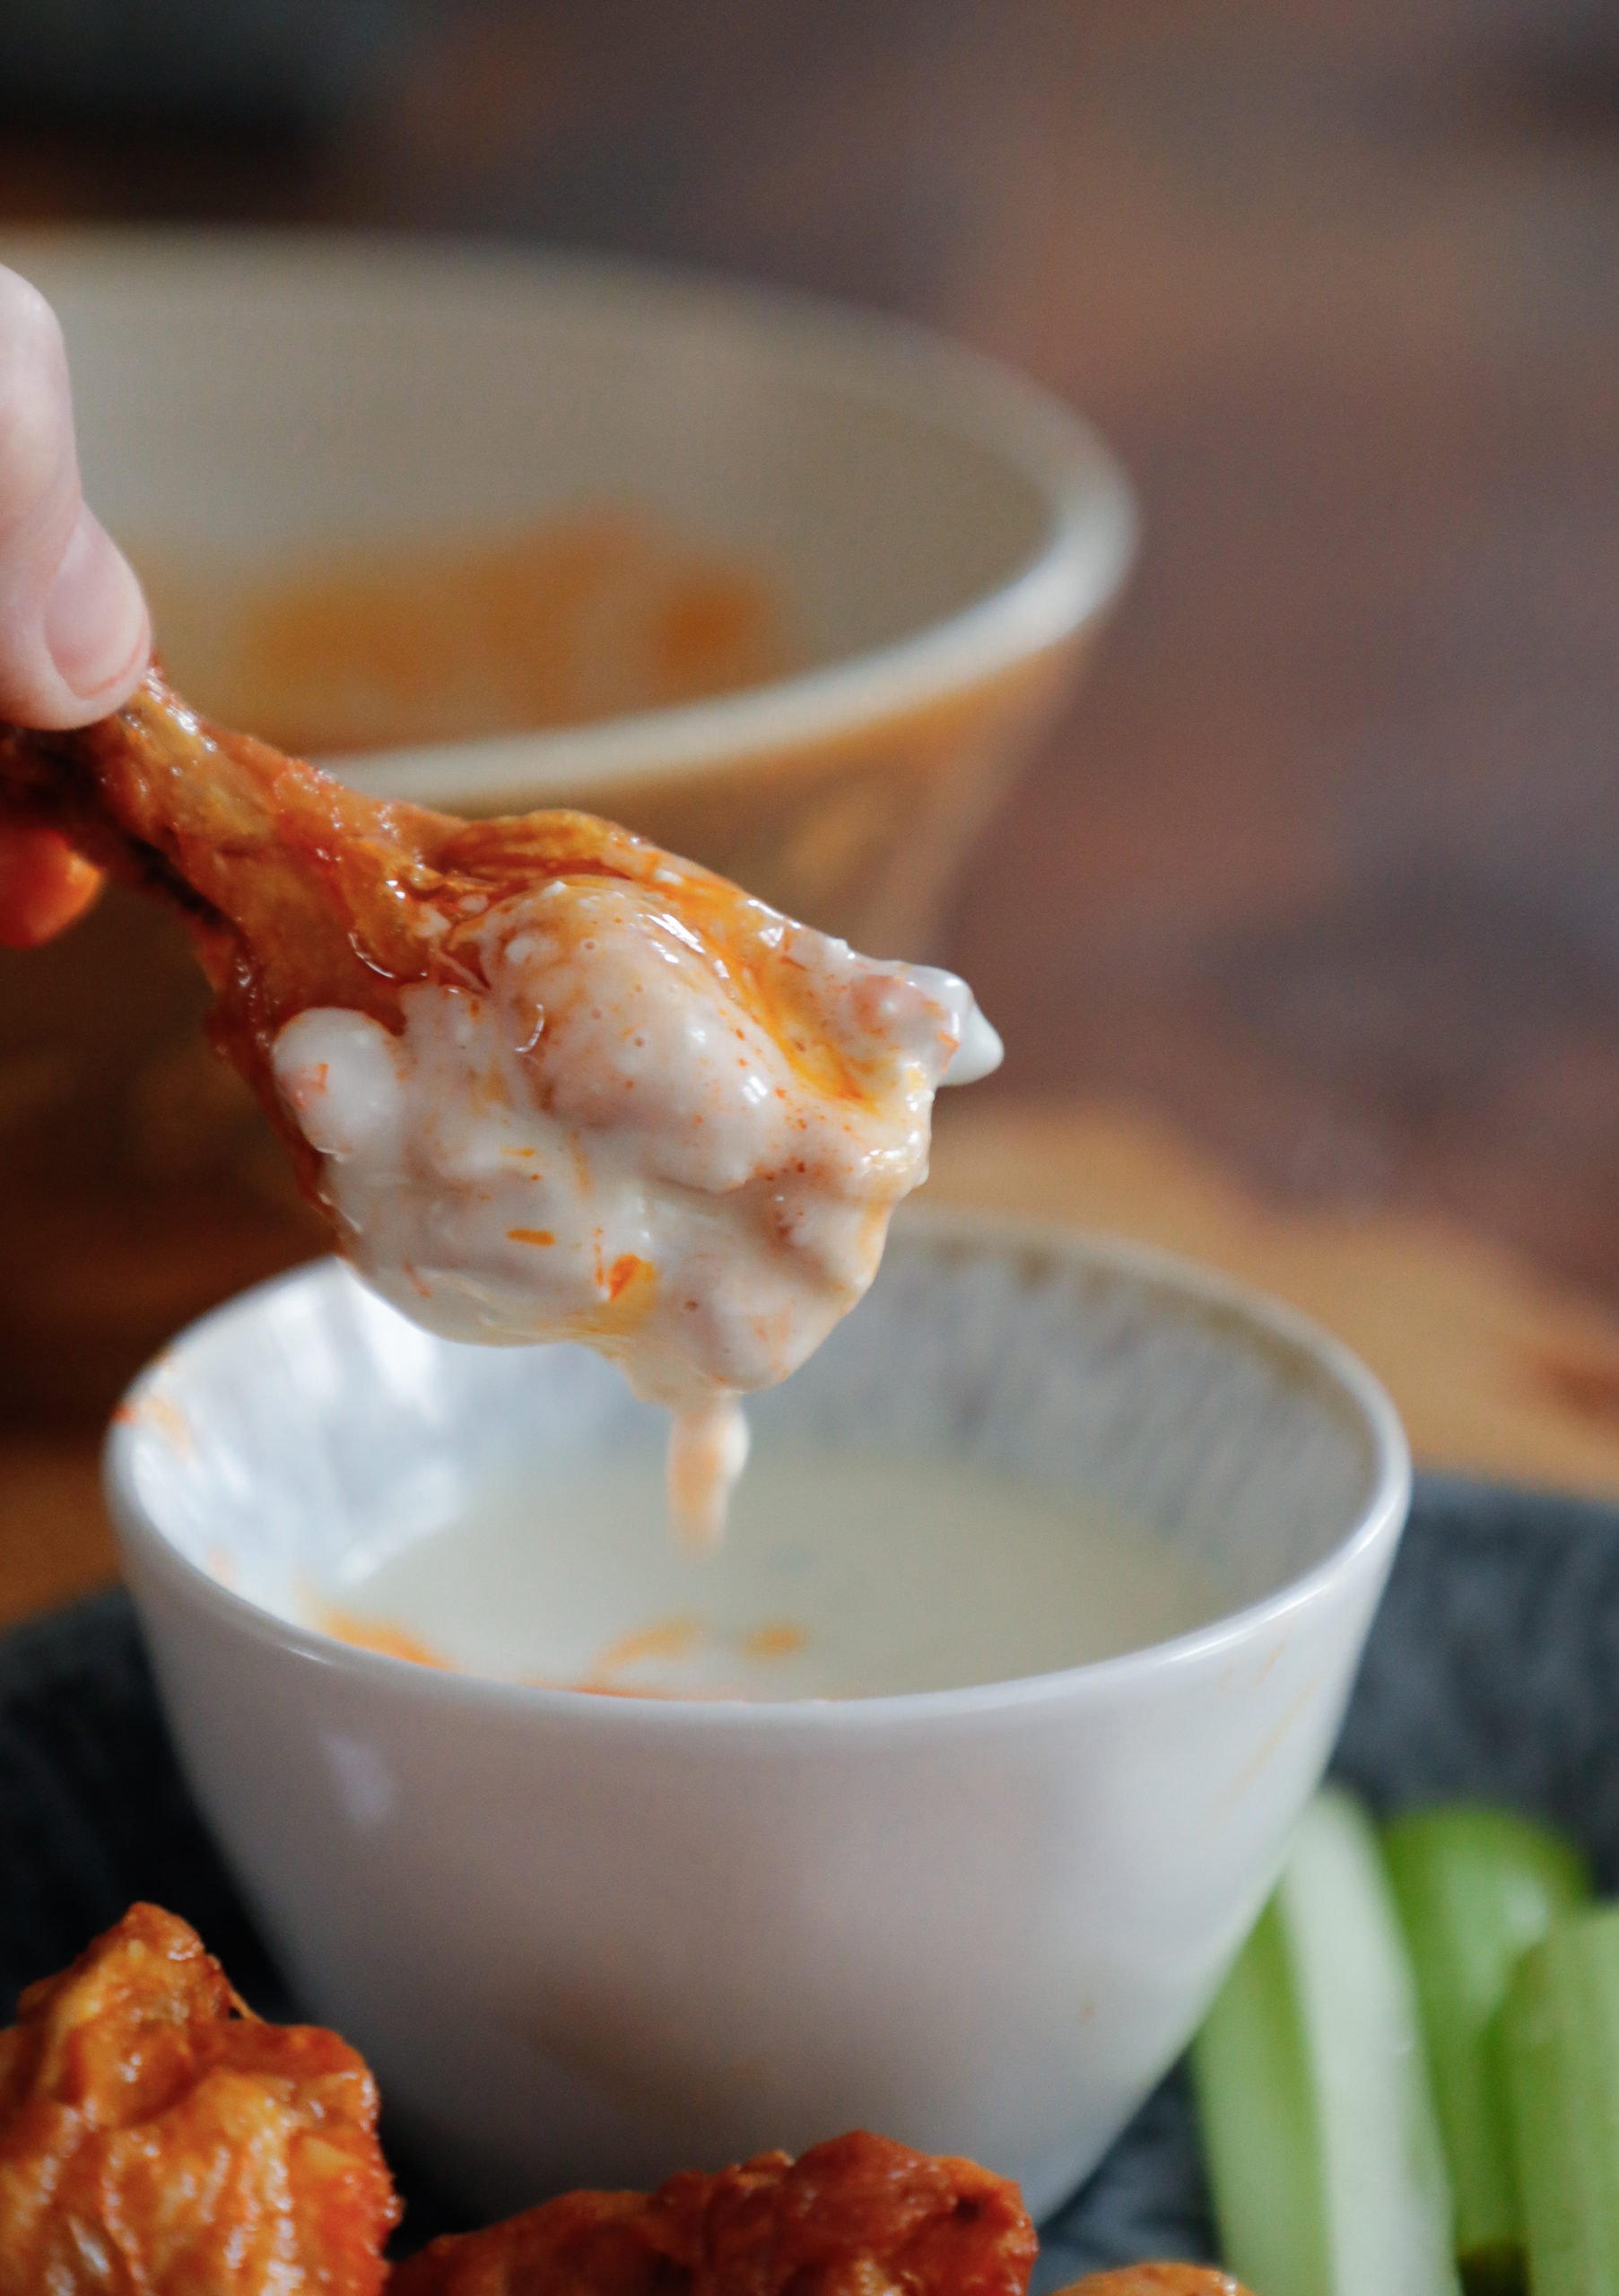 A buffalo wing dipped into a bowl of homemade blue cheese dressing